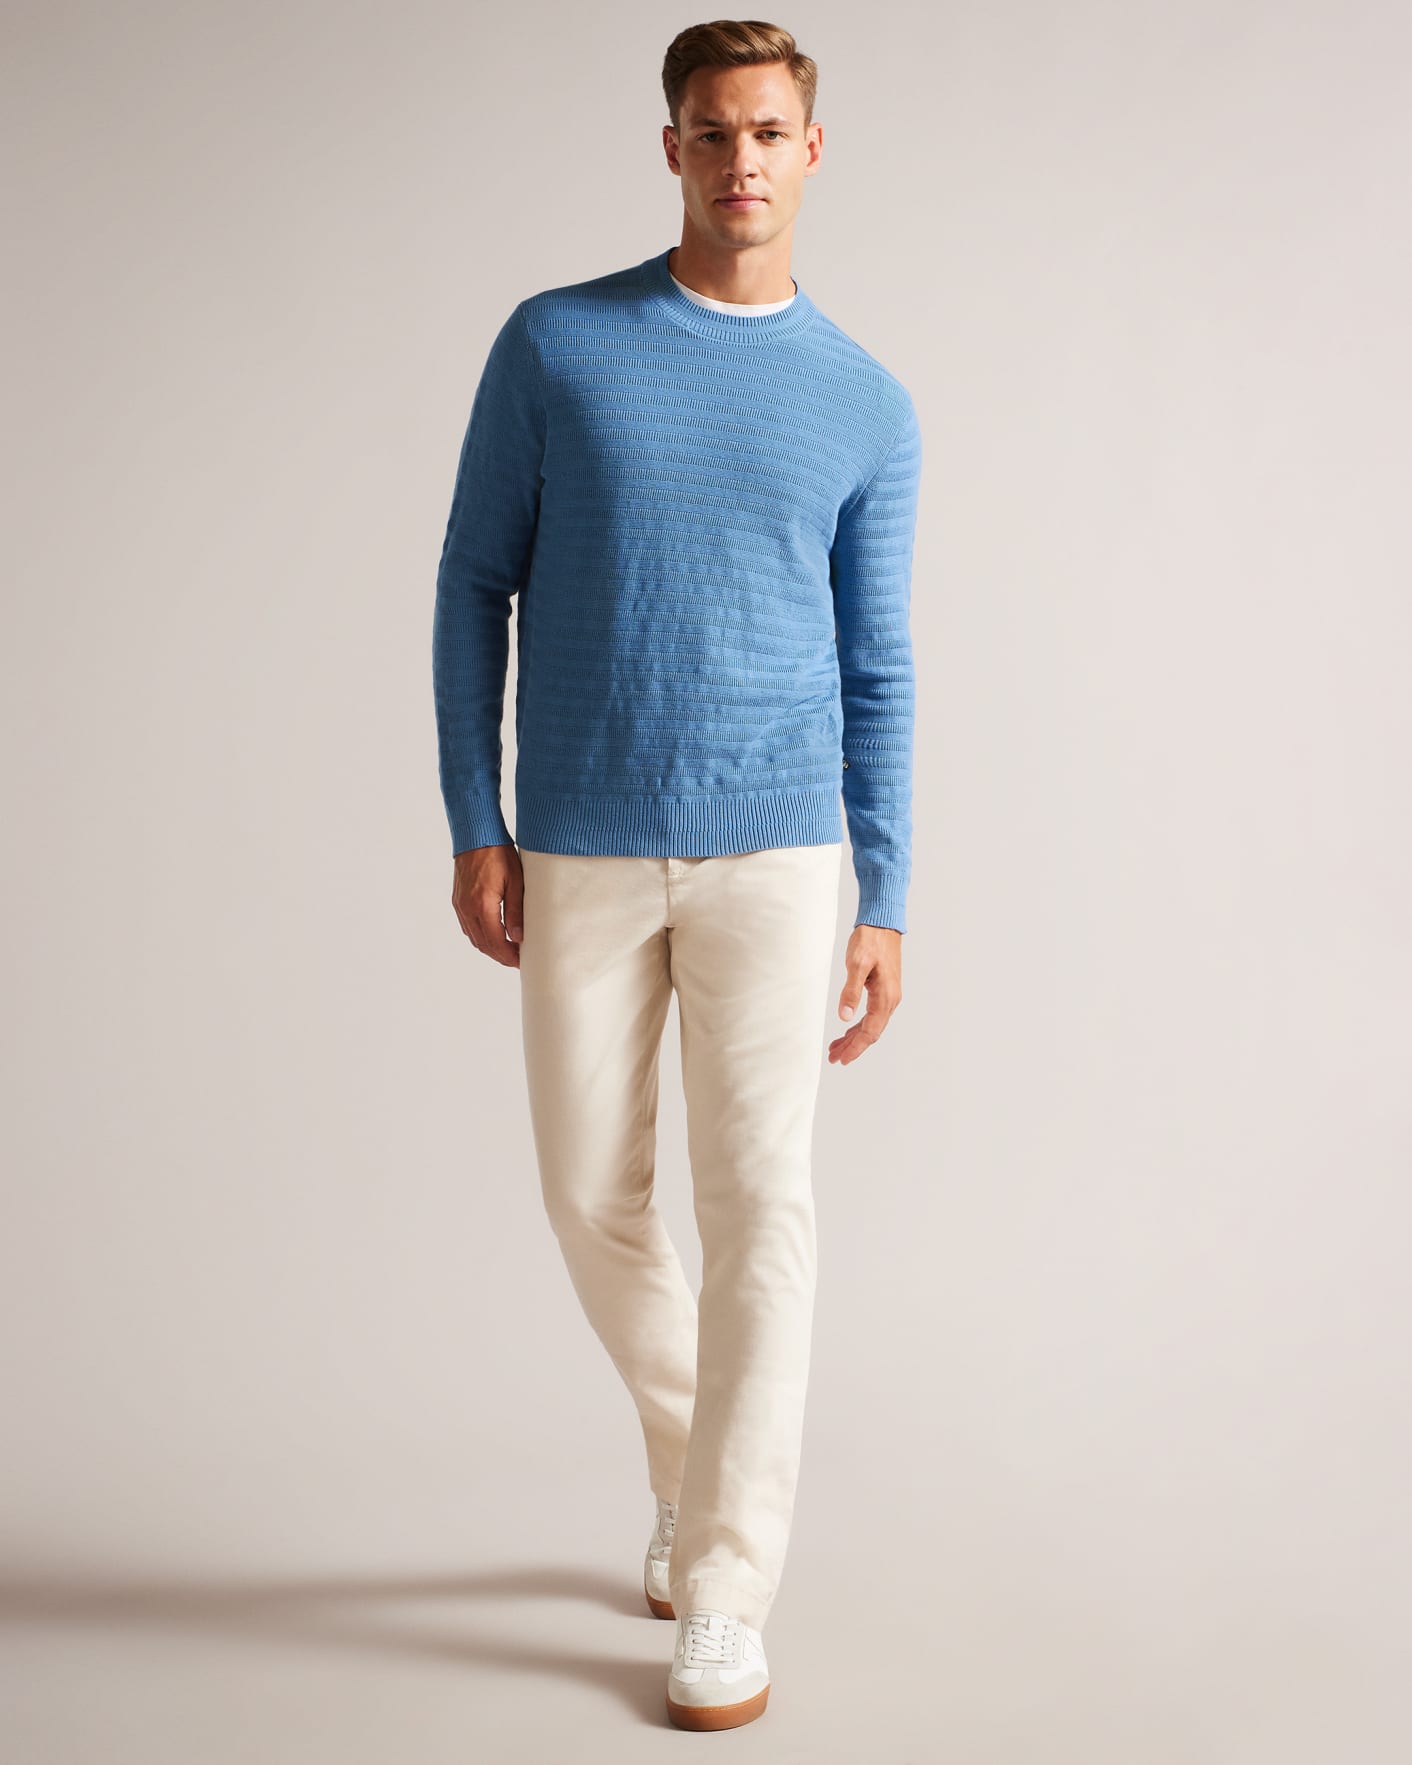 Sky Blue Long Sleeve Jumper With Textured Stitch Ted Baker